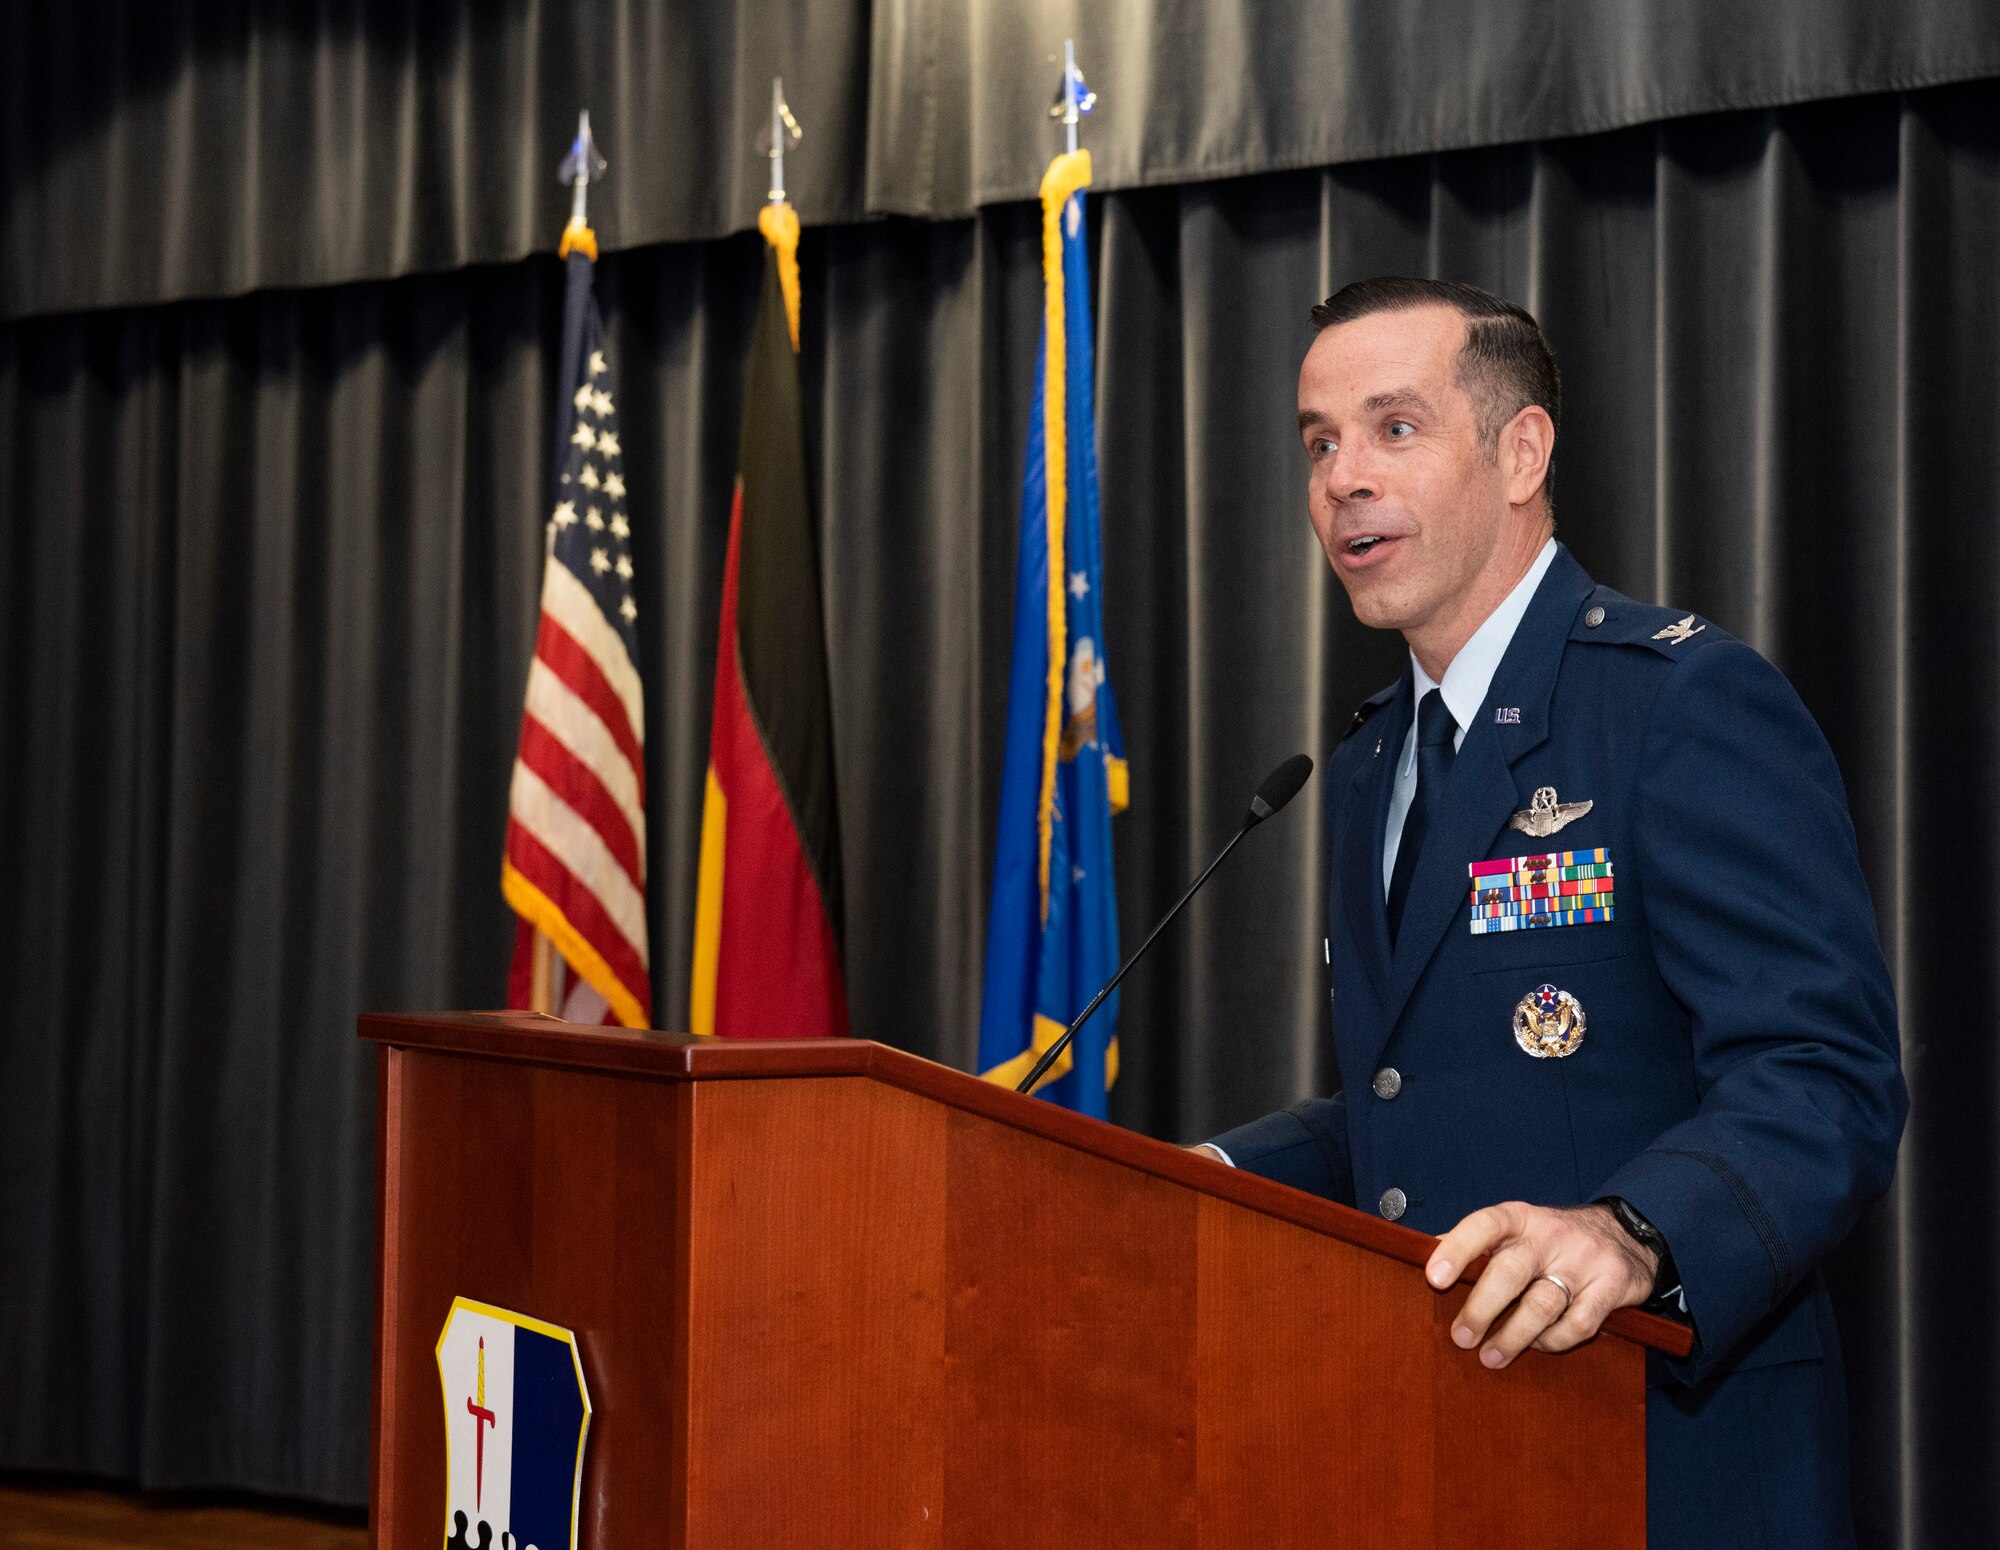 U.S. Air Force Col. Jason Hokaj, 52nd Fighter Wing vice commander, delivers closing remarks at the annual Black History Month Luncheon at Spangdahlem Air Base, Germany, Feb. 24, 2020. Hokaj's remarks included quotes from Muhammed Ali and encouraged attendees to dream big. (U.S. Air Force photo by Airman 1st Class Alison Stewart)